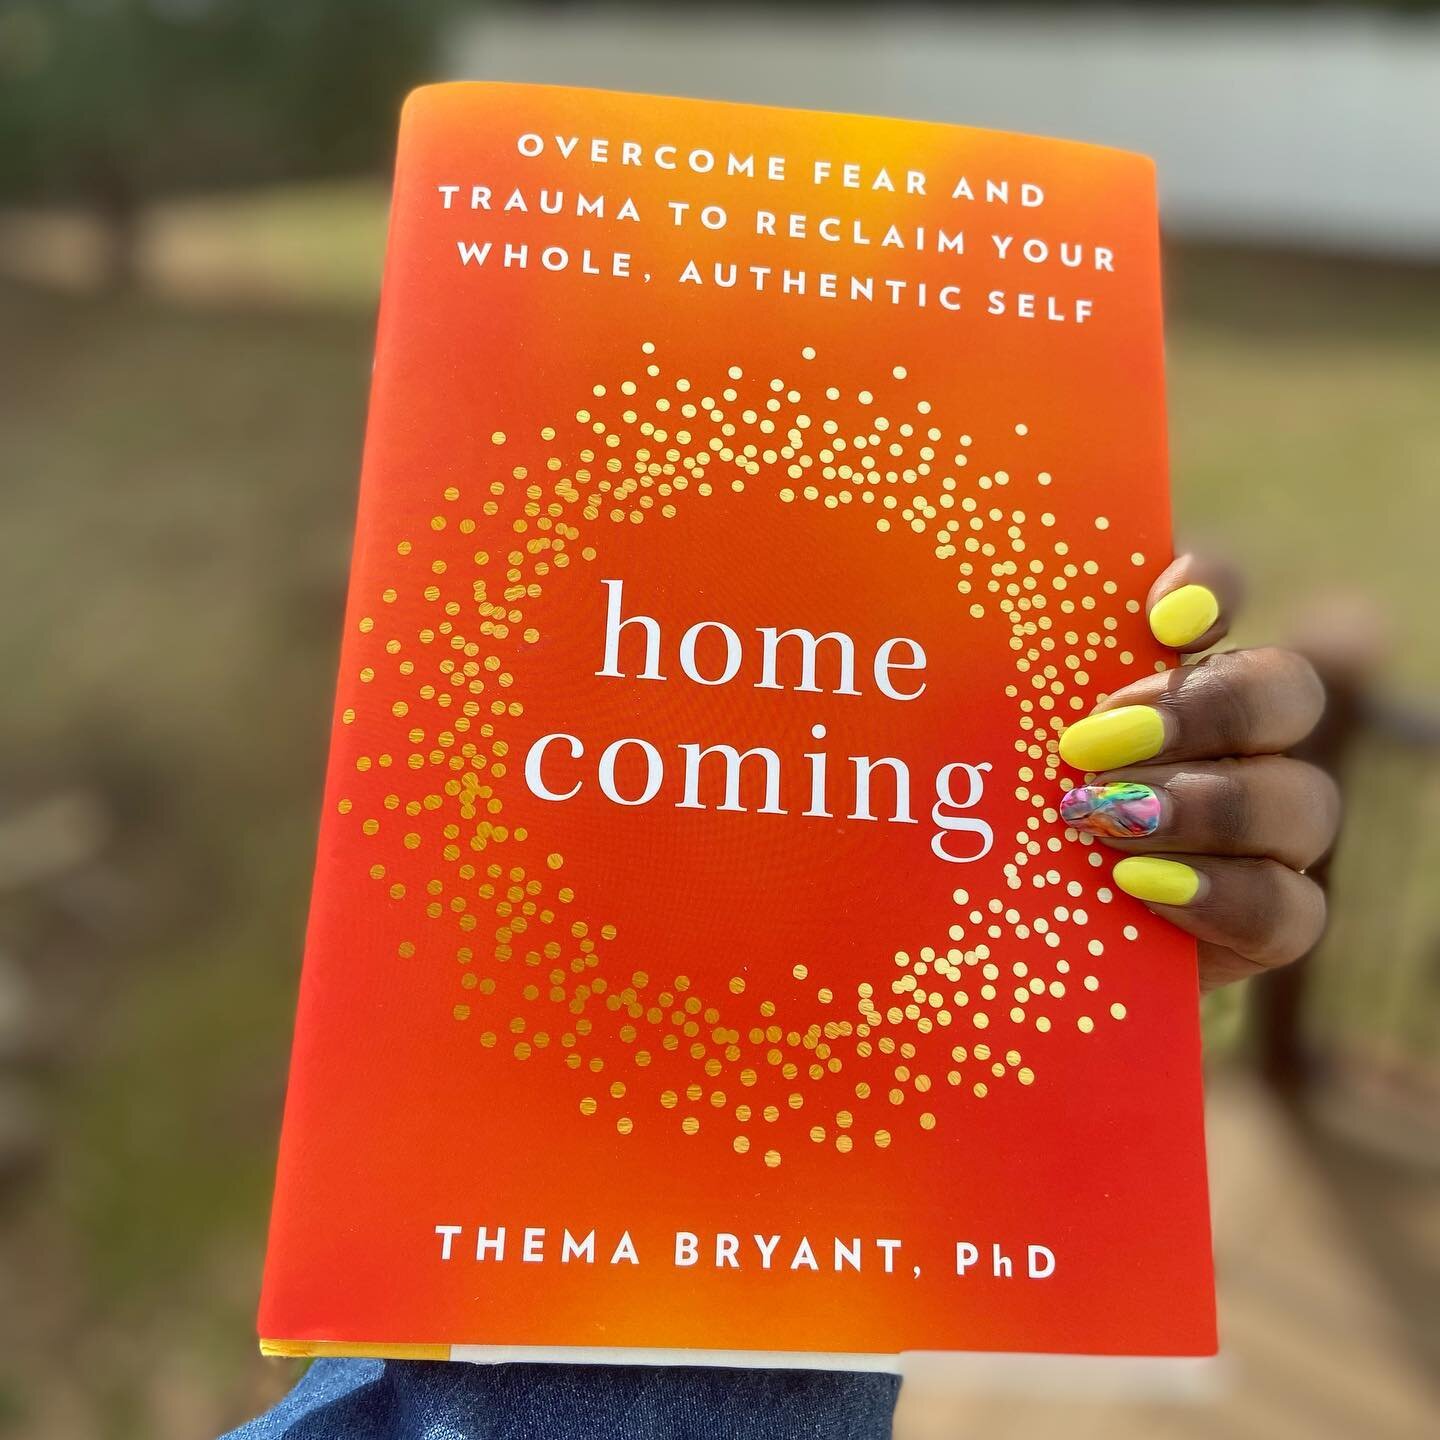 Spring is on the horizon and I am coming home, to myself. To have Dr. Thema&rsquo;s (@dr.thema) wisdom, insight, compassion and grace in a book is a gift that I will savor. #reverenddonnao #homecoming